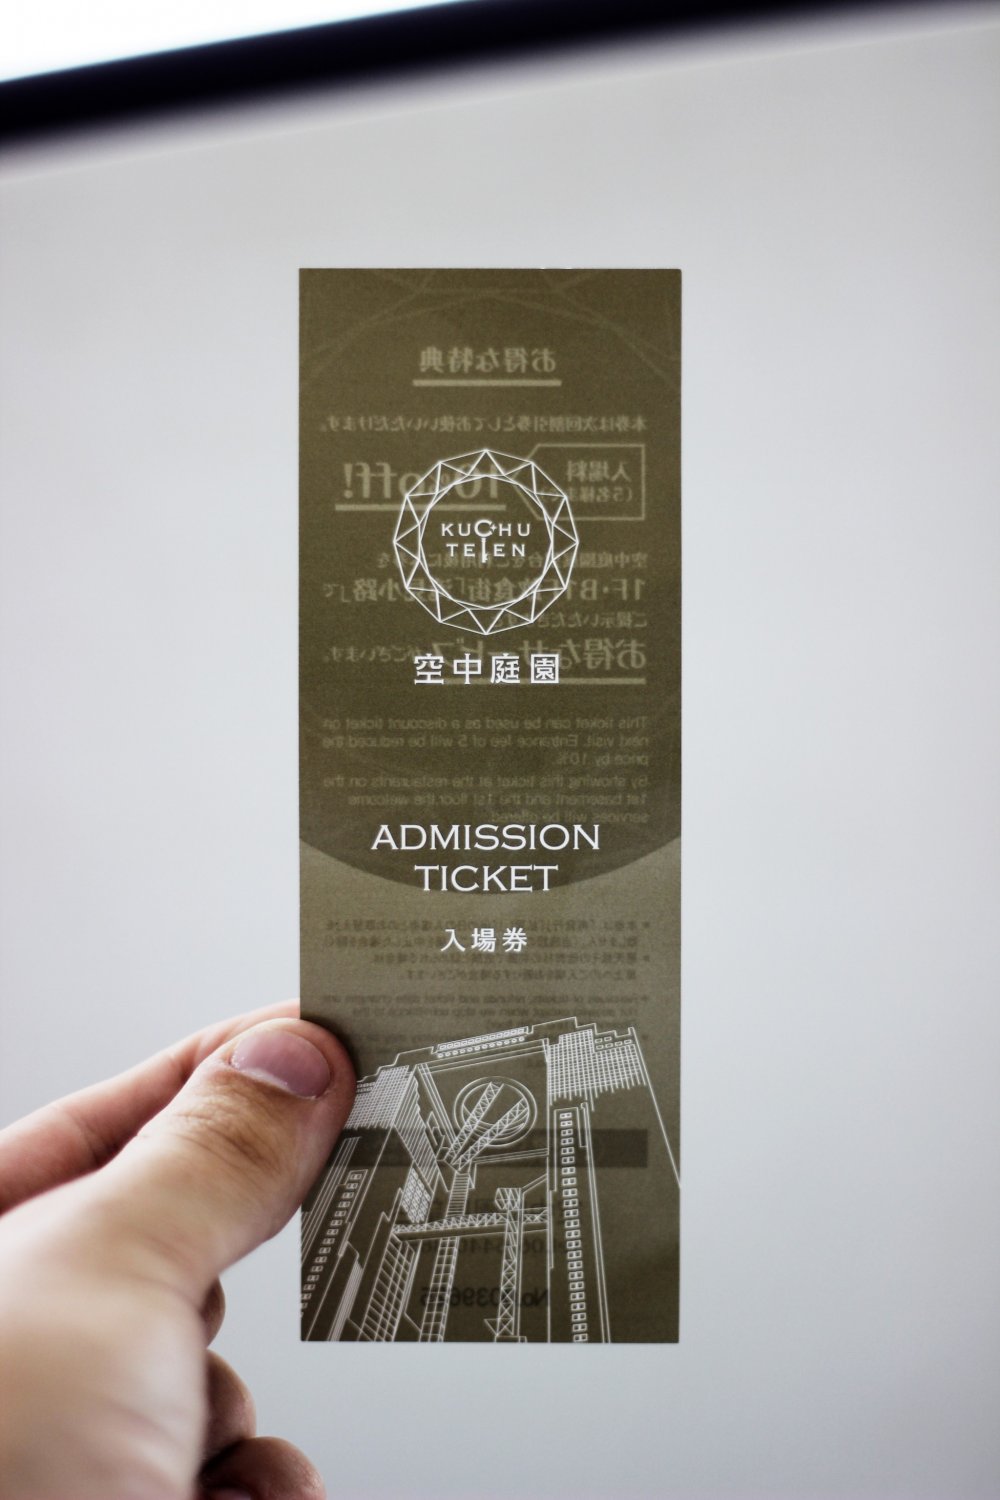 A very affordable and keepsake worthy ticket!&nbsp;